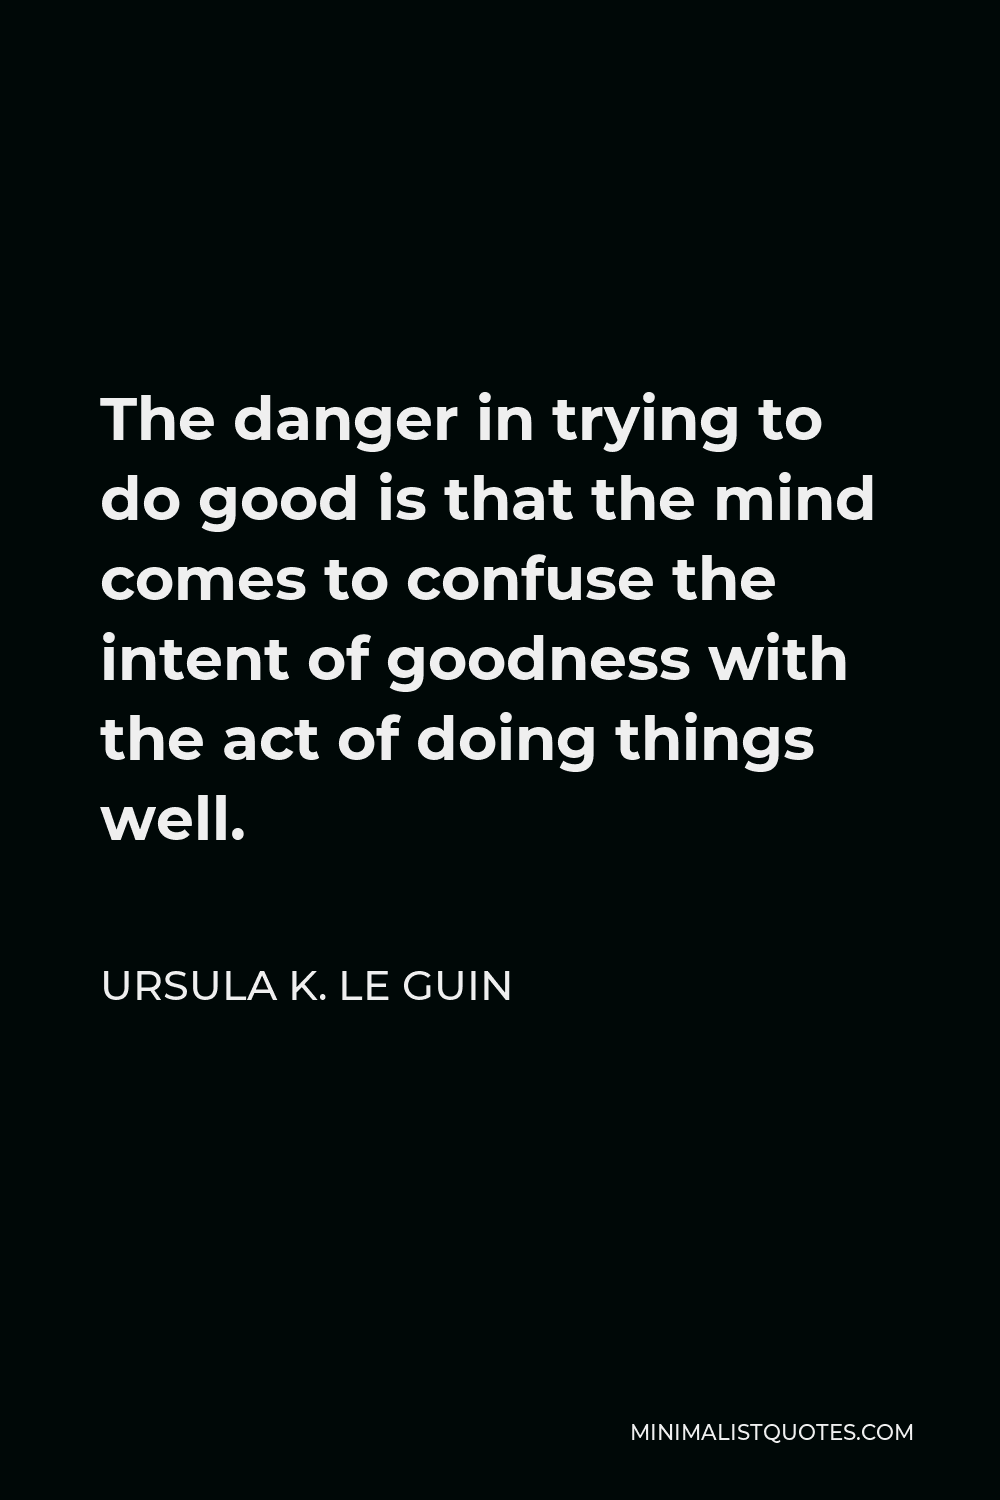 Ursula K. Le Guin Quote - The danger in trying to do good is that the mind comes to confuse the intent of goodness with the act of doing things well.